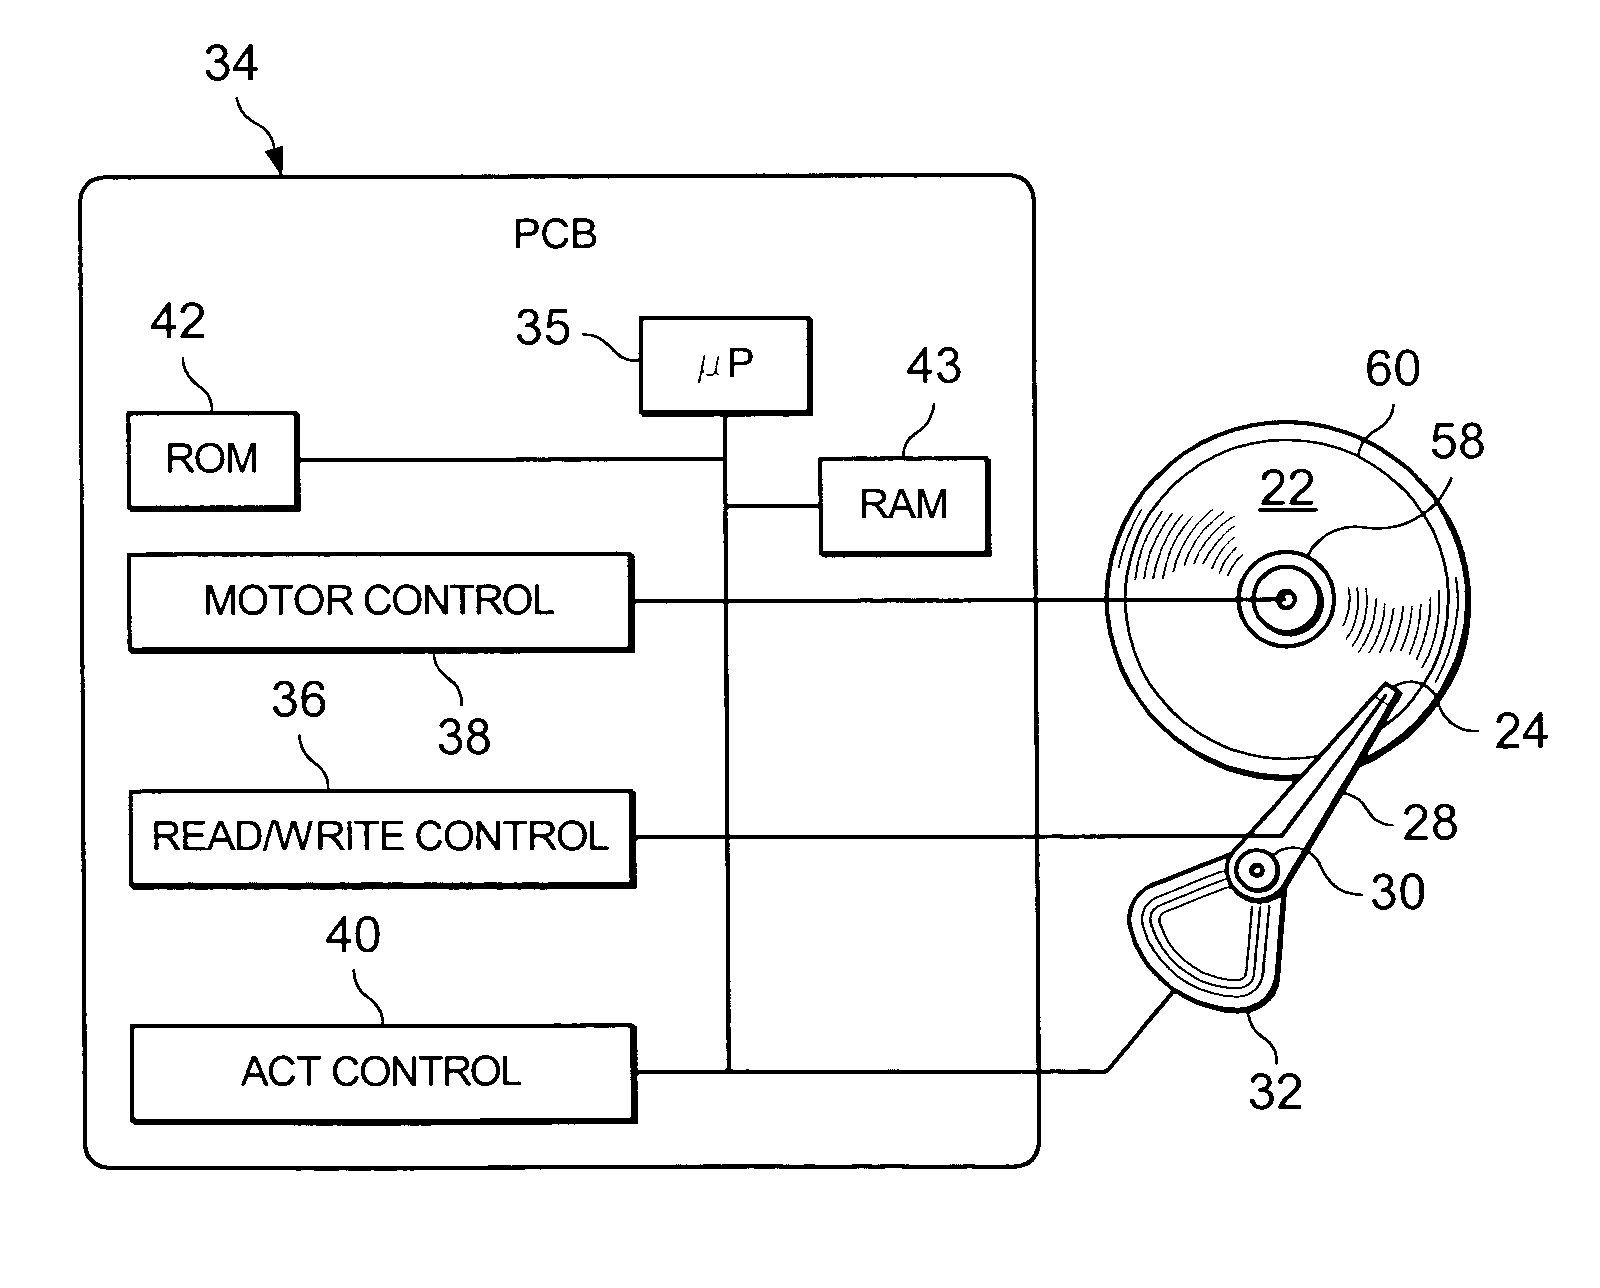 Efficient notch coefficient computation for a disc drive control system using fixed point math